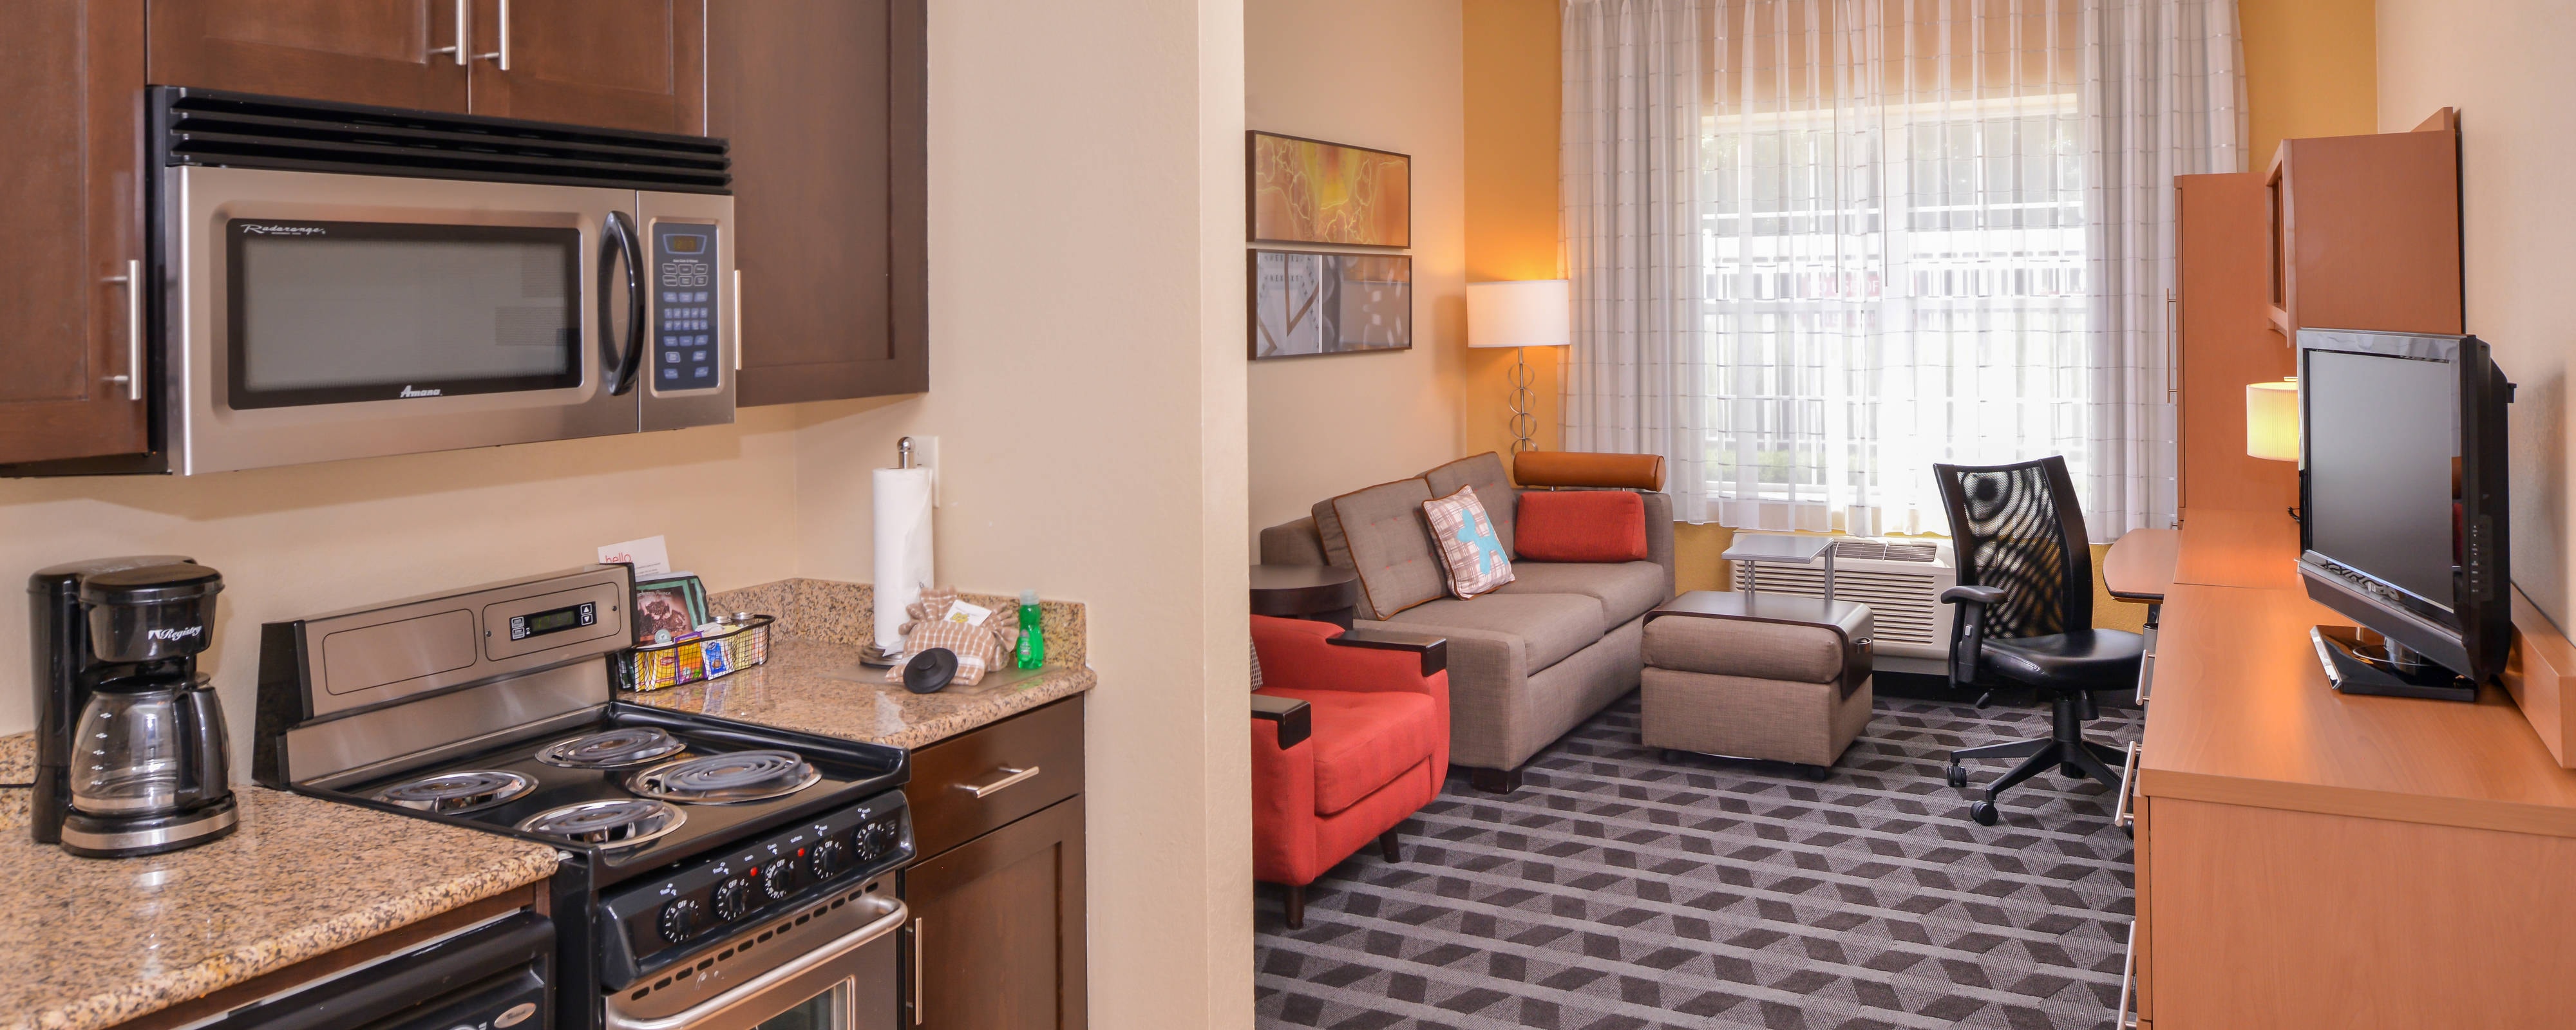 TownePlace Suites Marriott Arundel Mills BWI  BWI area Hotel Photo Tour